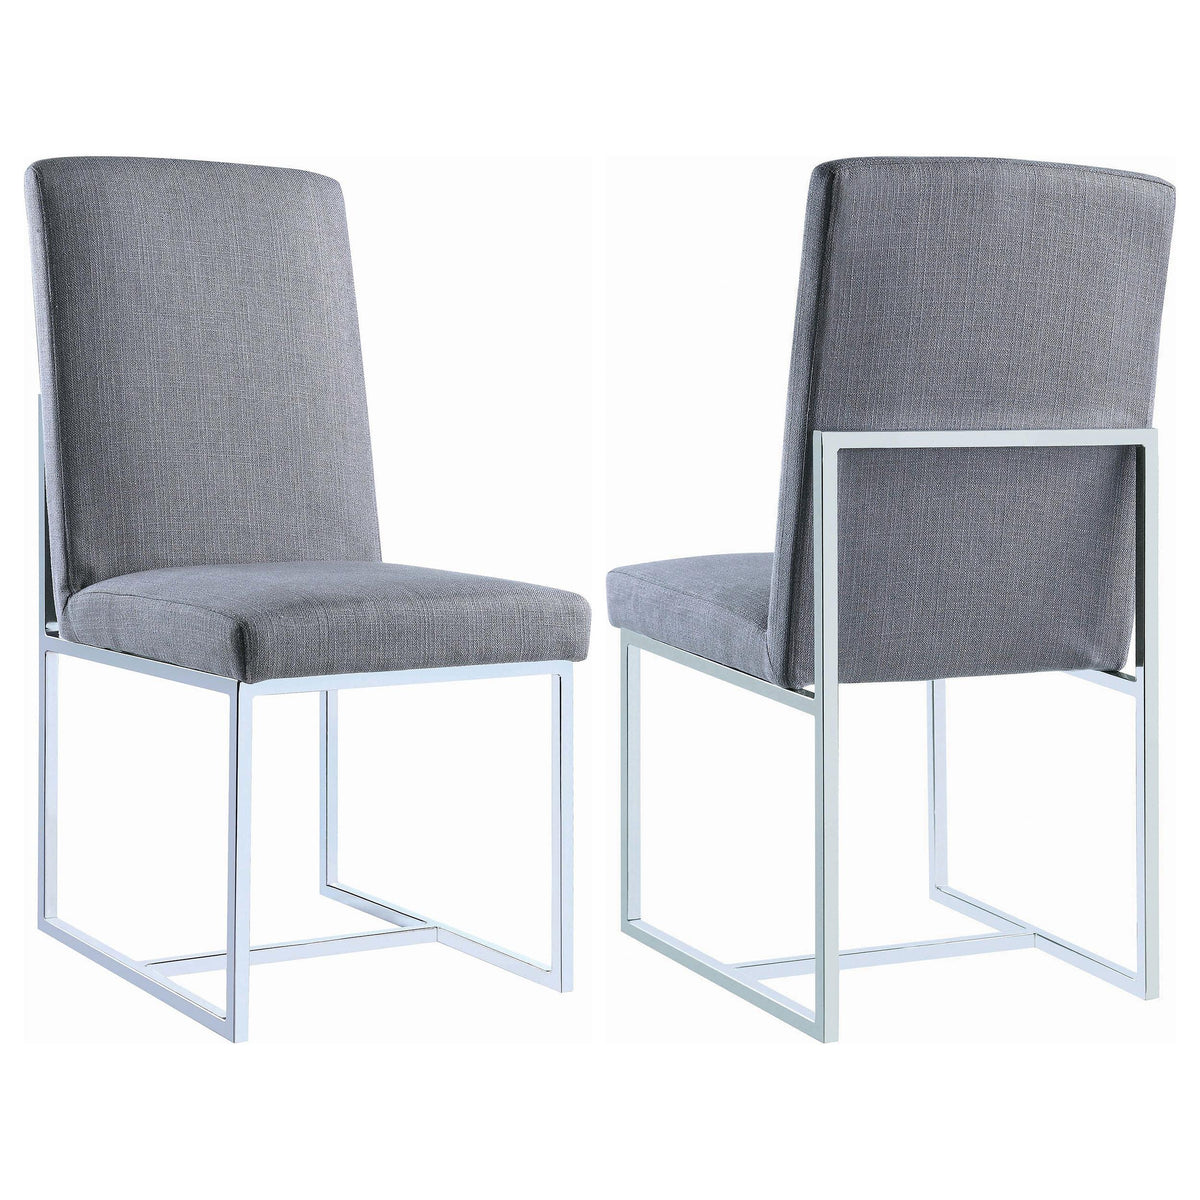 Mackinnon Upholstered Side Chairs Grey and Chrome (Set of 2) Mackinnon Upholstered Side Chairs Grey and Chrome (Set of 2) Half Price Furniture